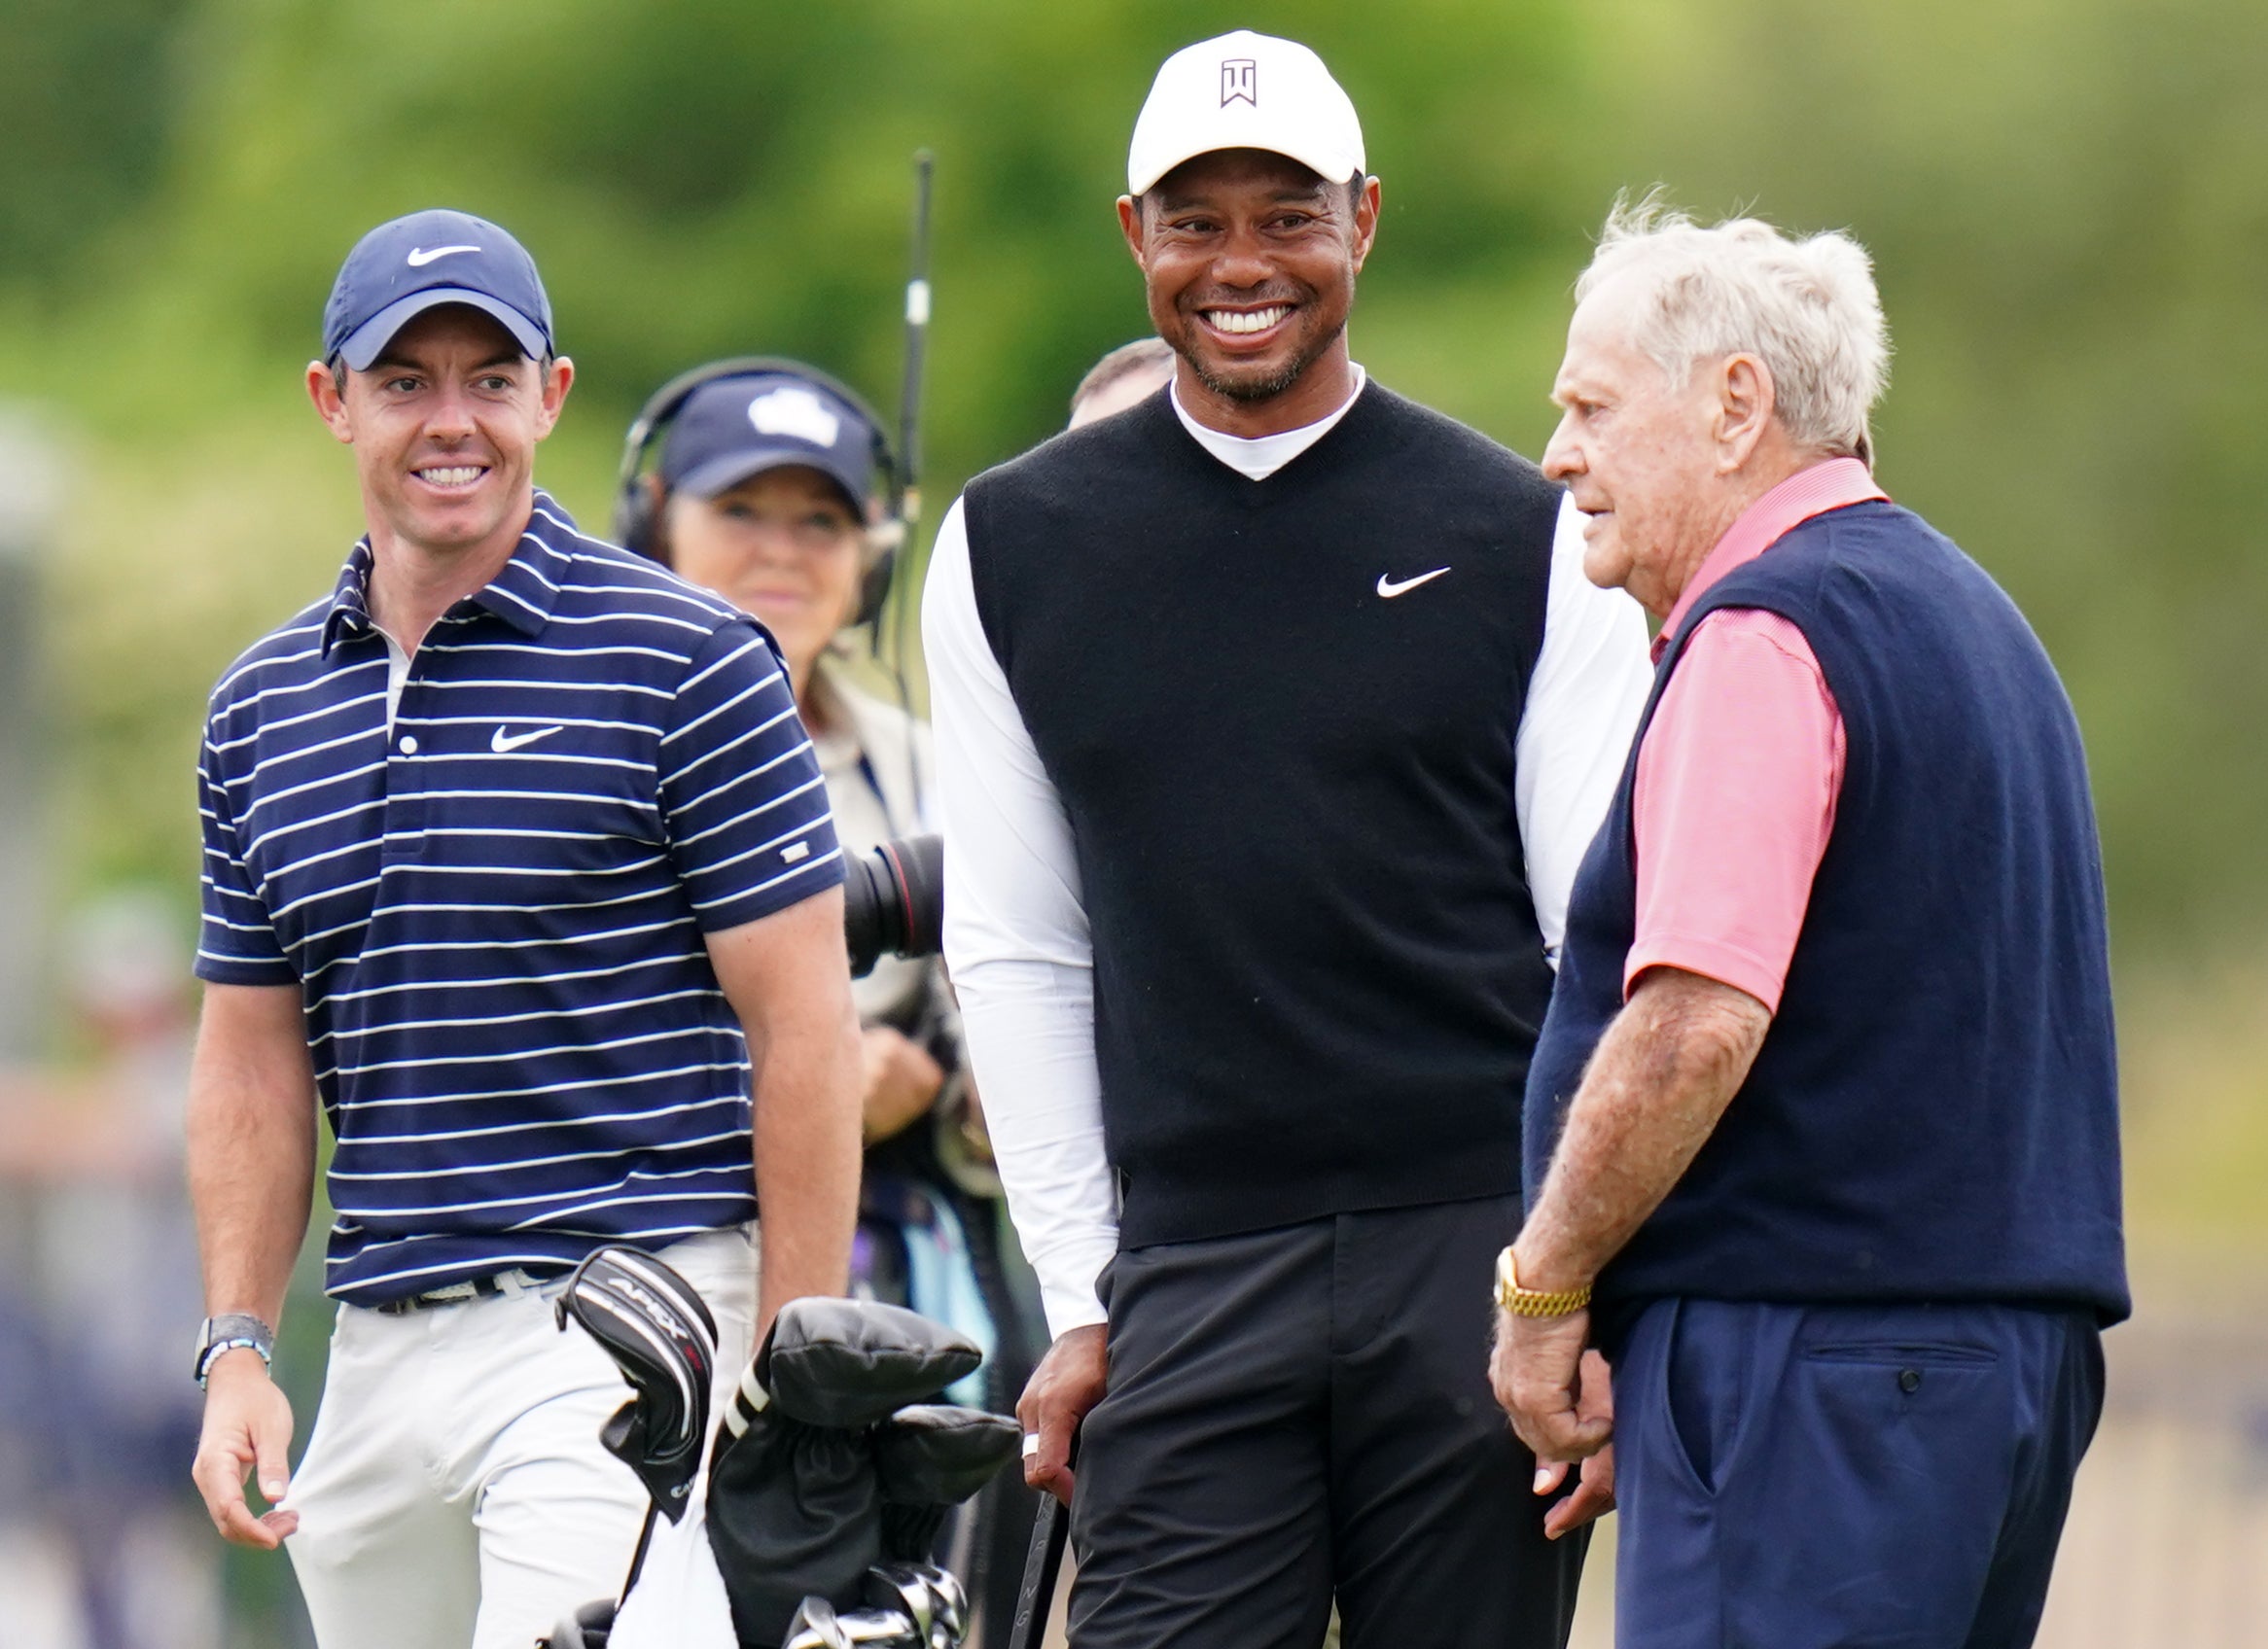 McIlroy and Woods have led opposition to LIV Golf (Jane Barlow/PA)